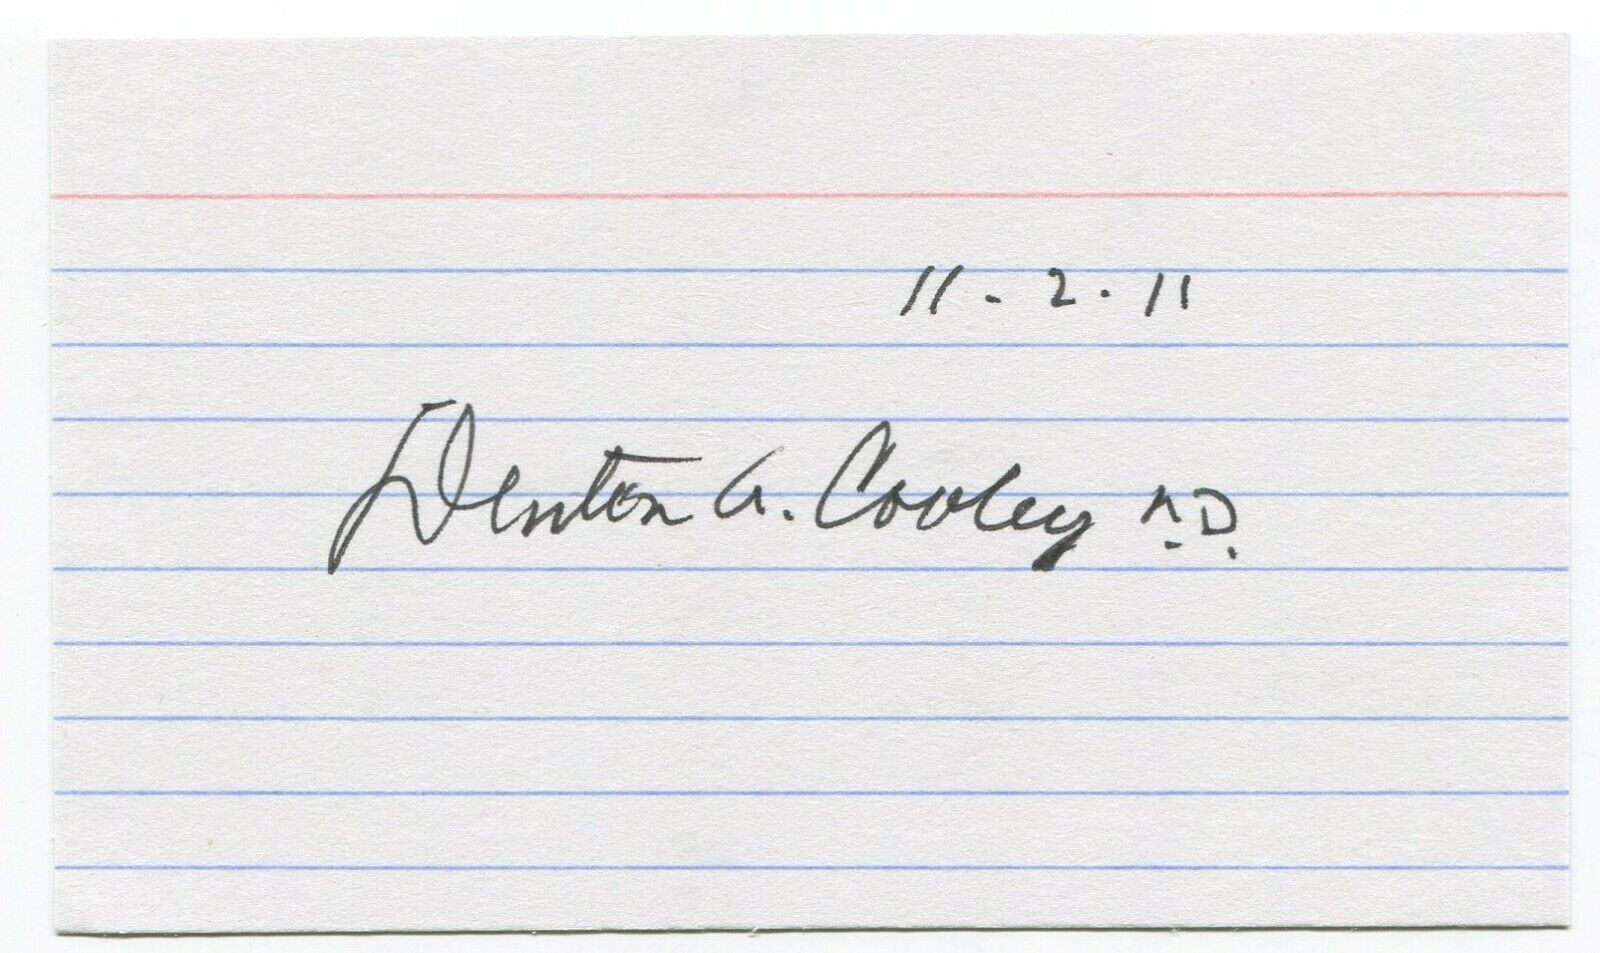 Denton Cooley Signed 3x5 Index Card Autographed Surgeon First Artificial Heart